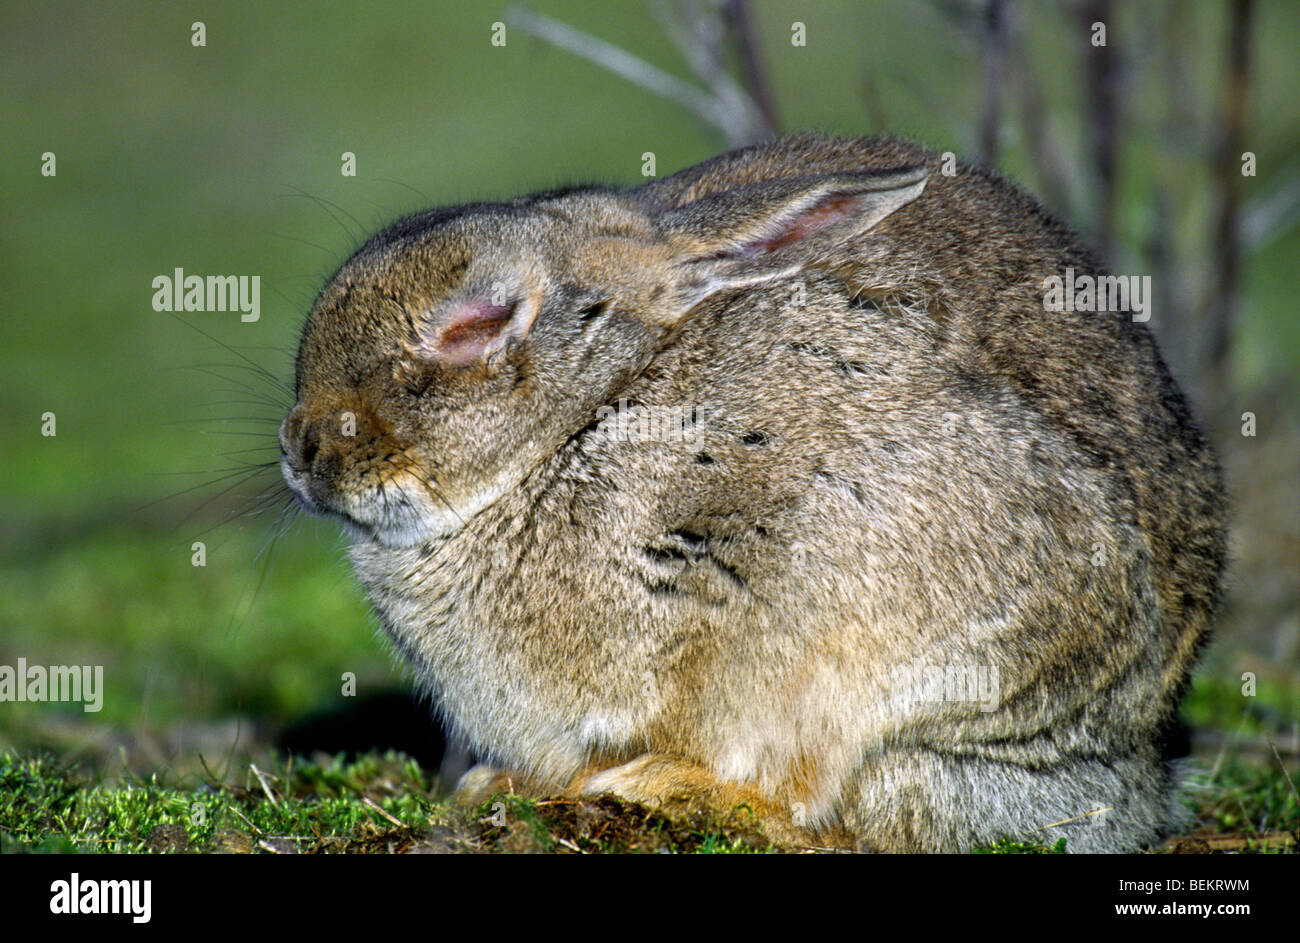 Sick rabbit (Oryctolagus cuniculus) infected with the Myxomatosis disease showing swelling around the eyes Stock Photo